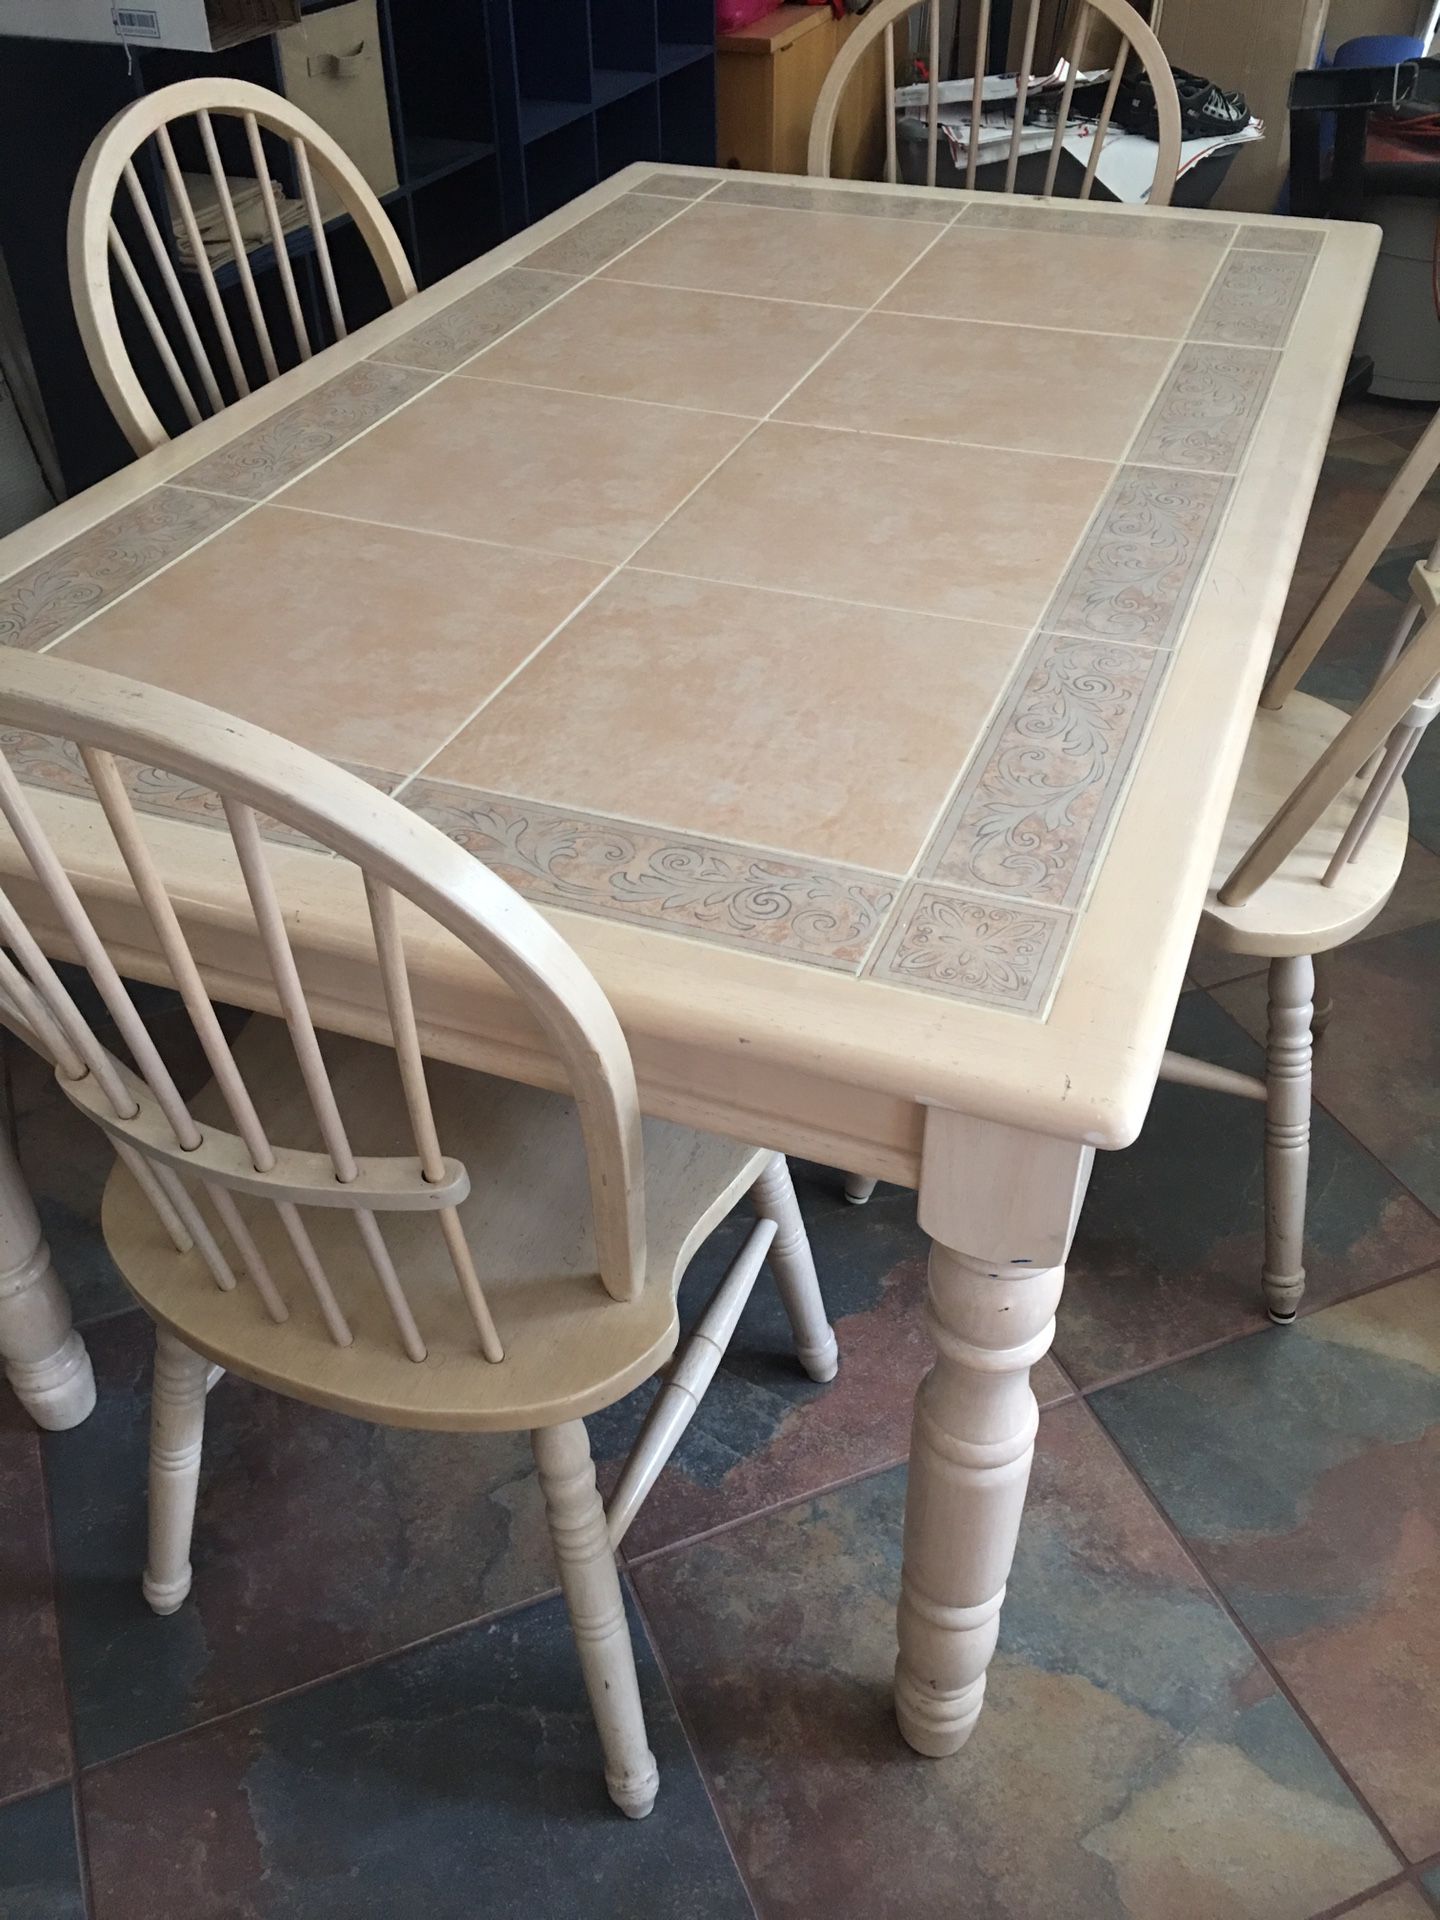 Kitchen table with 4 chairs solid wood with inlaid tile top.